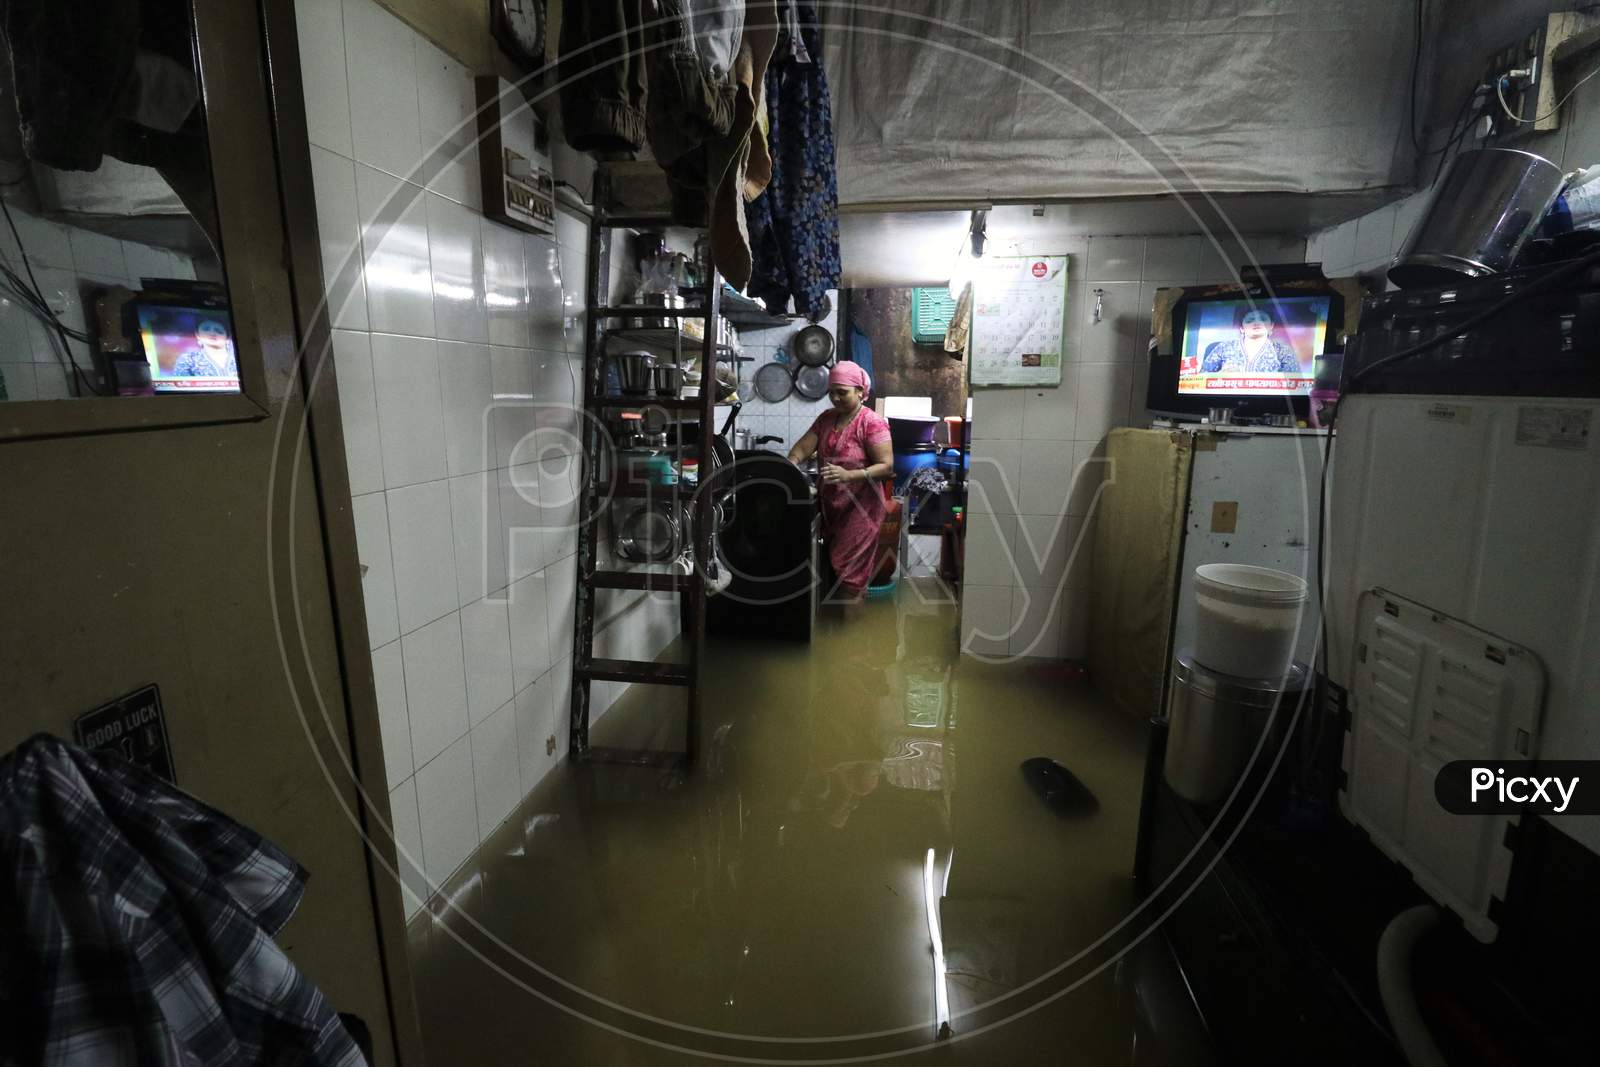 A woman is seen inside her house that is waterlogged due heavy rains, in Mumbai, India on September 23, 2020.